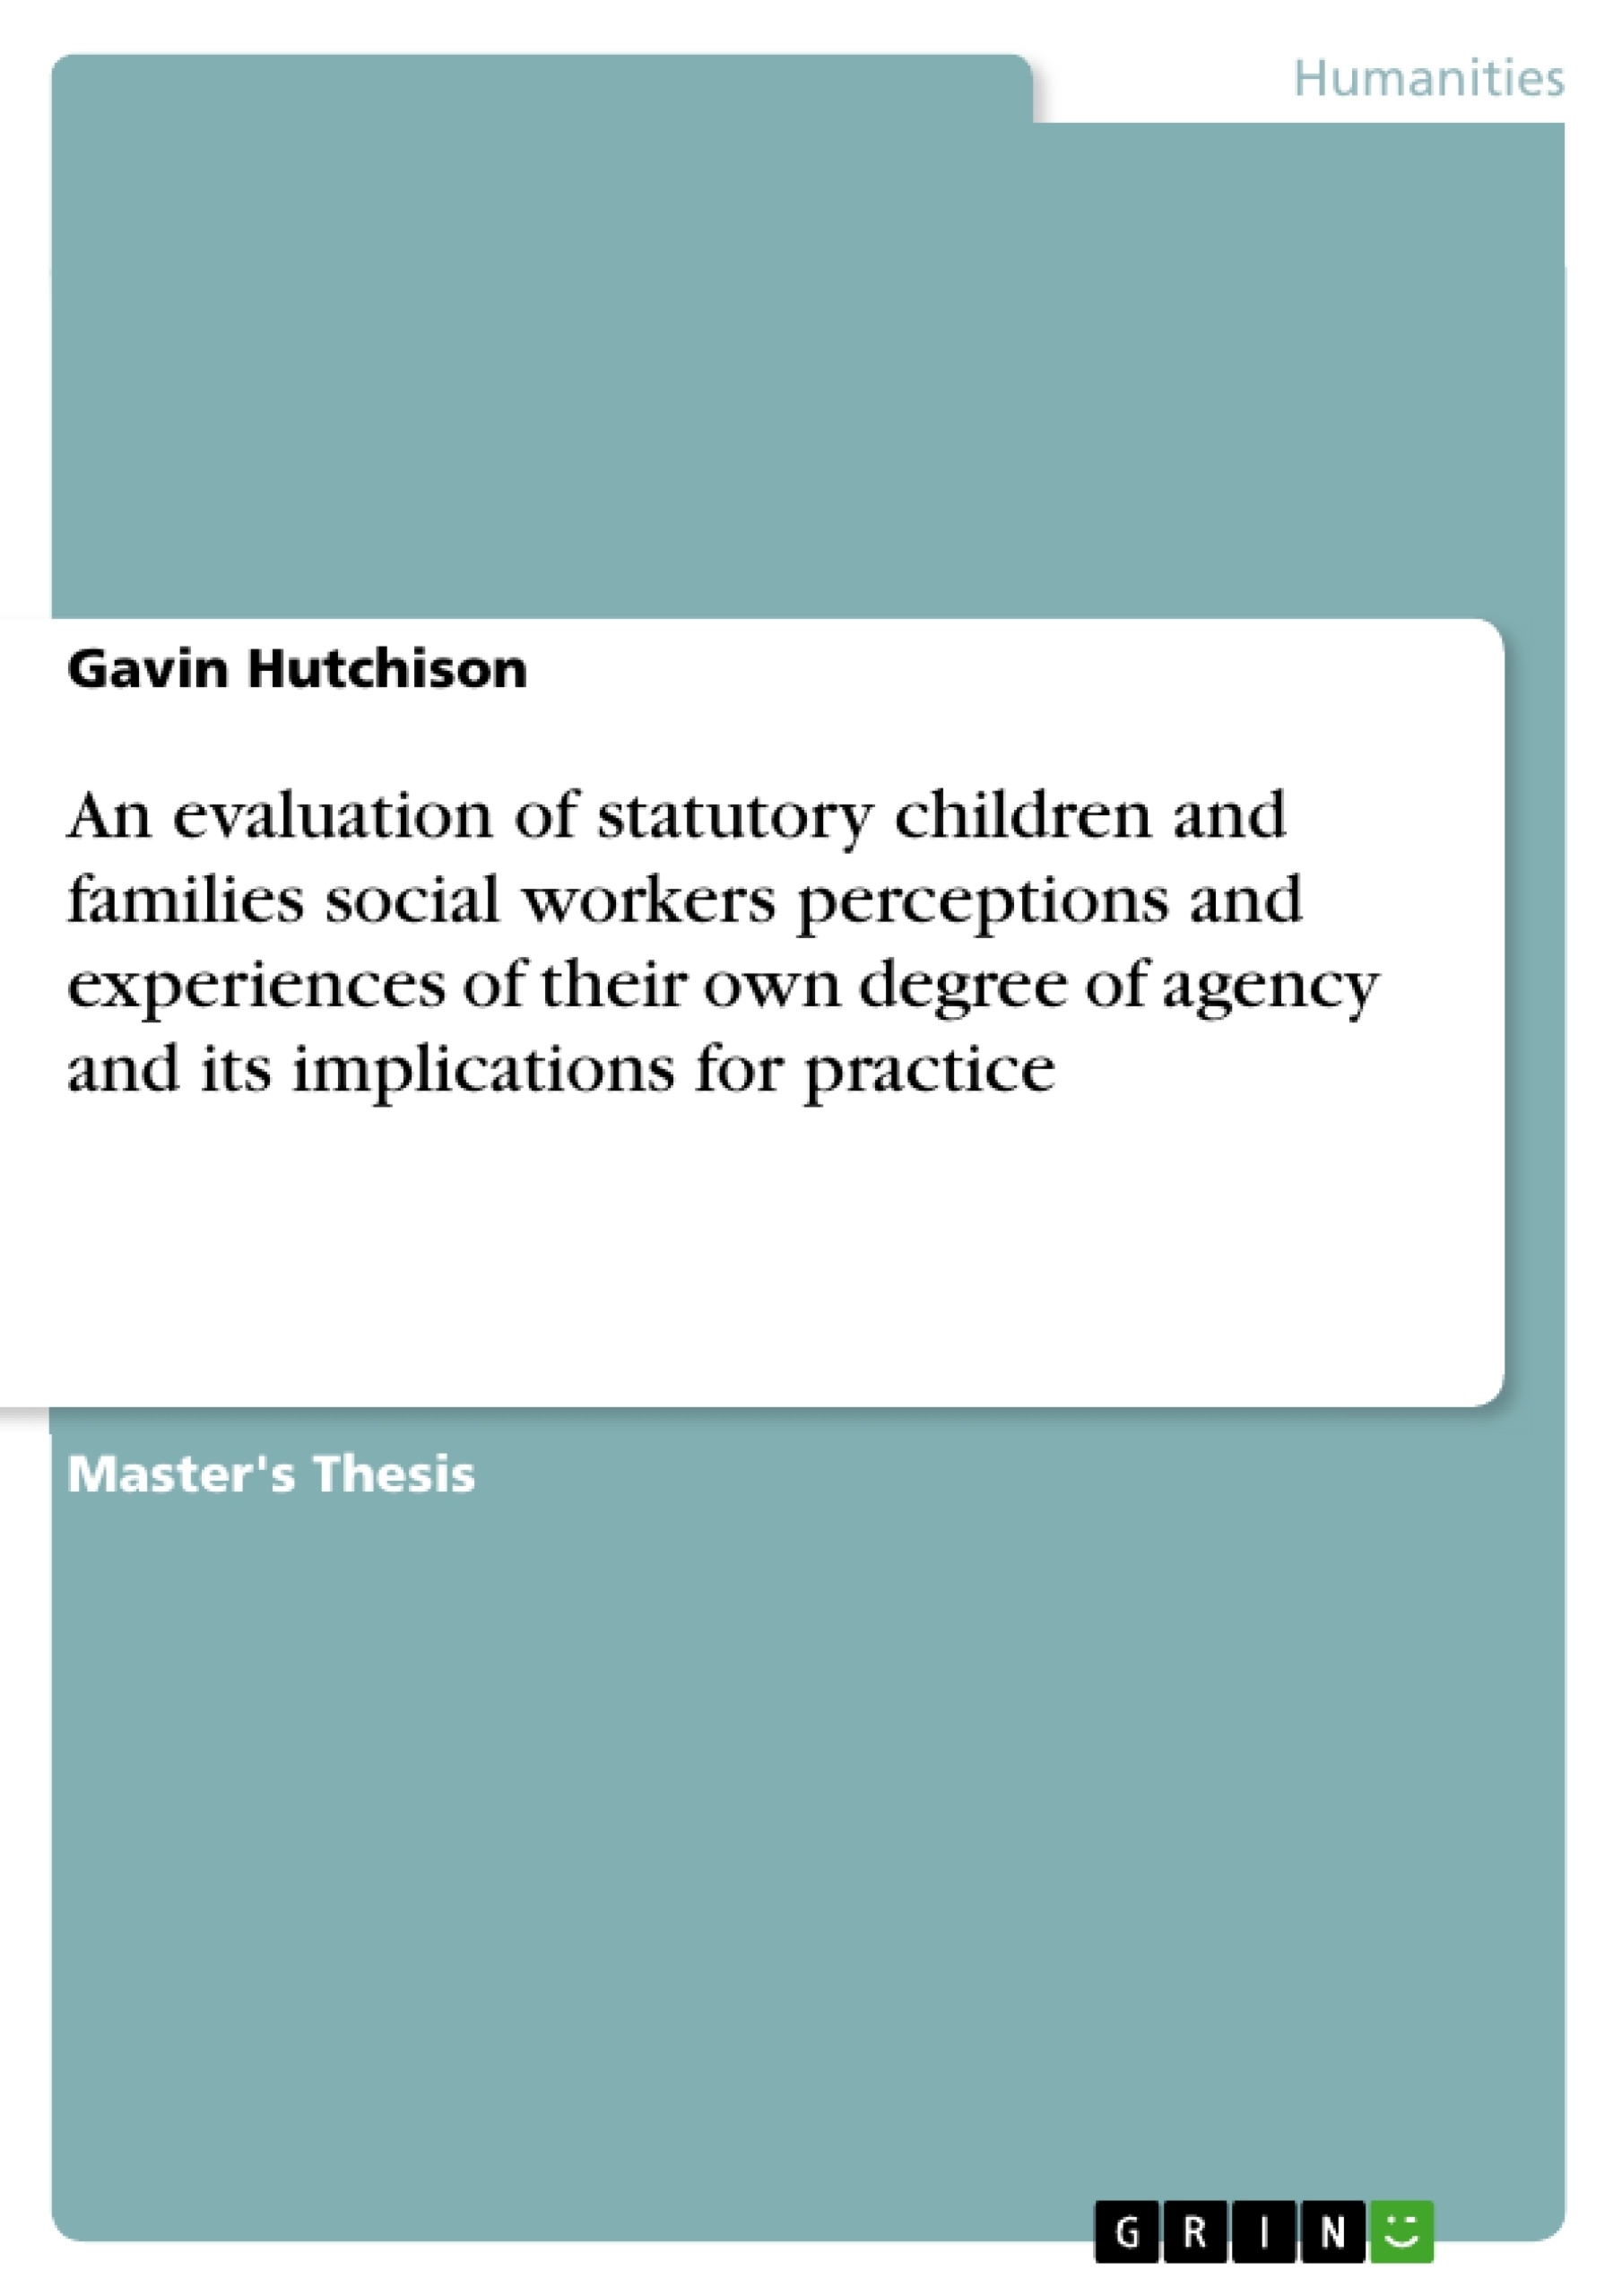 Titre: An evaluation of statutory children and families social workers perceptions and experiences of their own degree of agency and its implications for practice